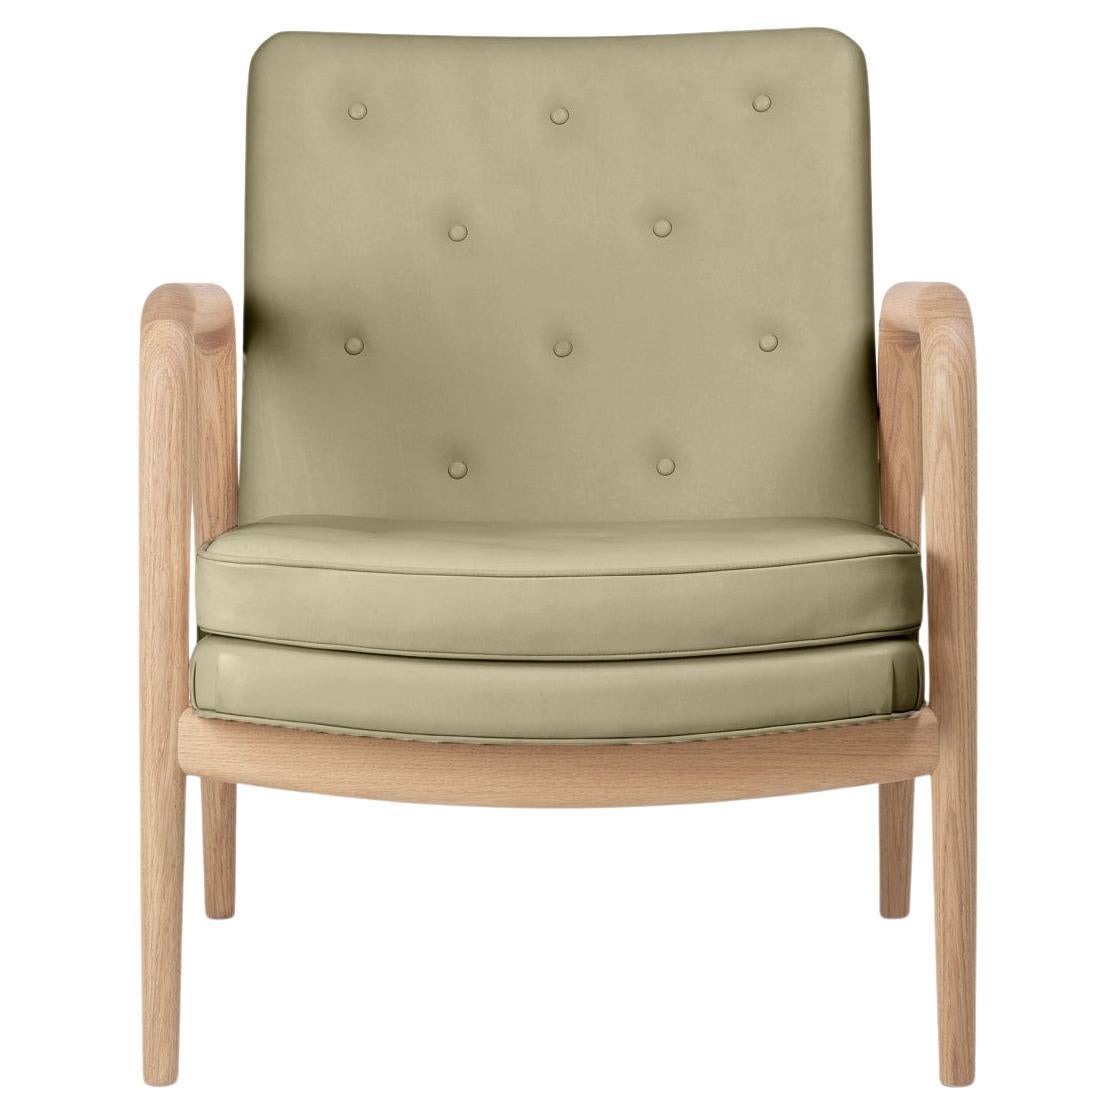 Carl Hansen Foyer Series Chair in Edelman's Helm Leather by Ilse Crawford For Sale